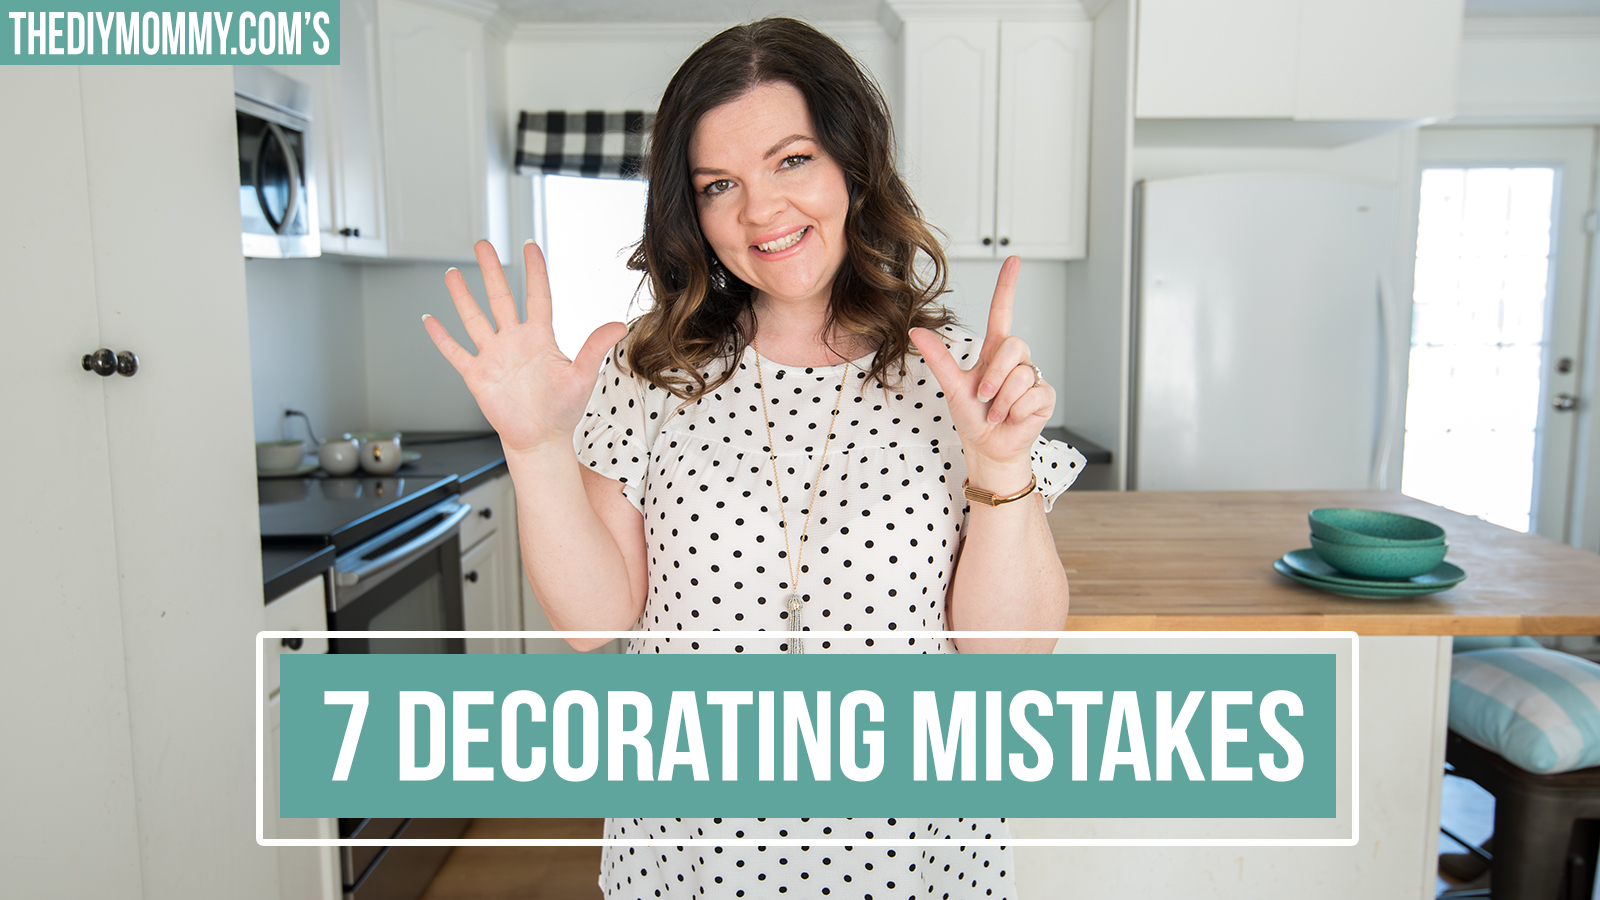 7 Decorating Mistakes & How to Fix Them!